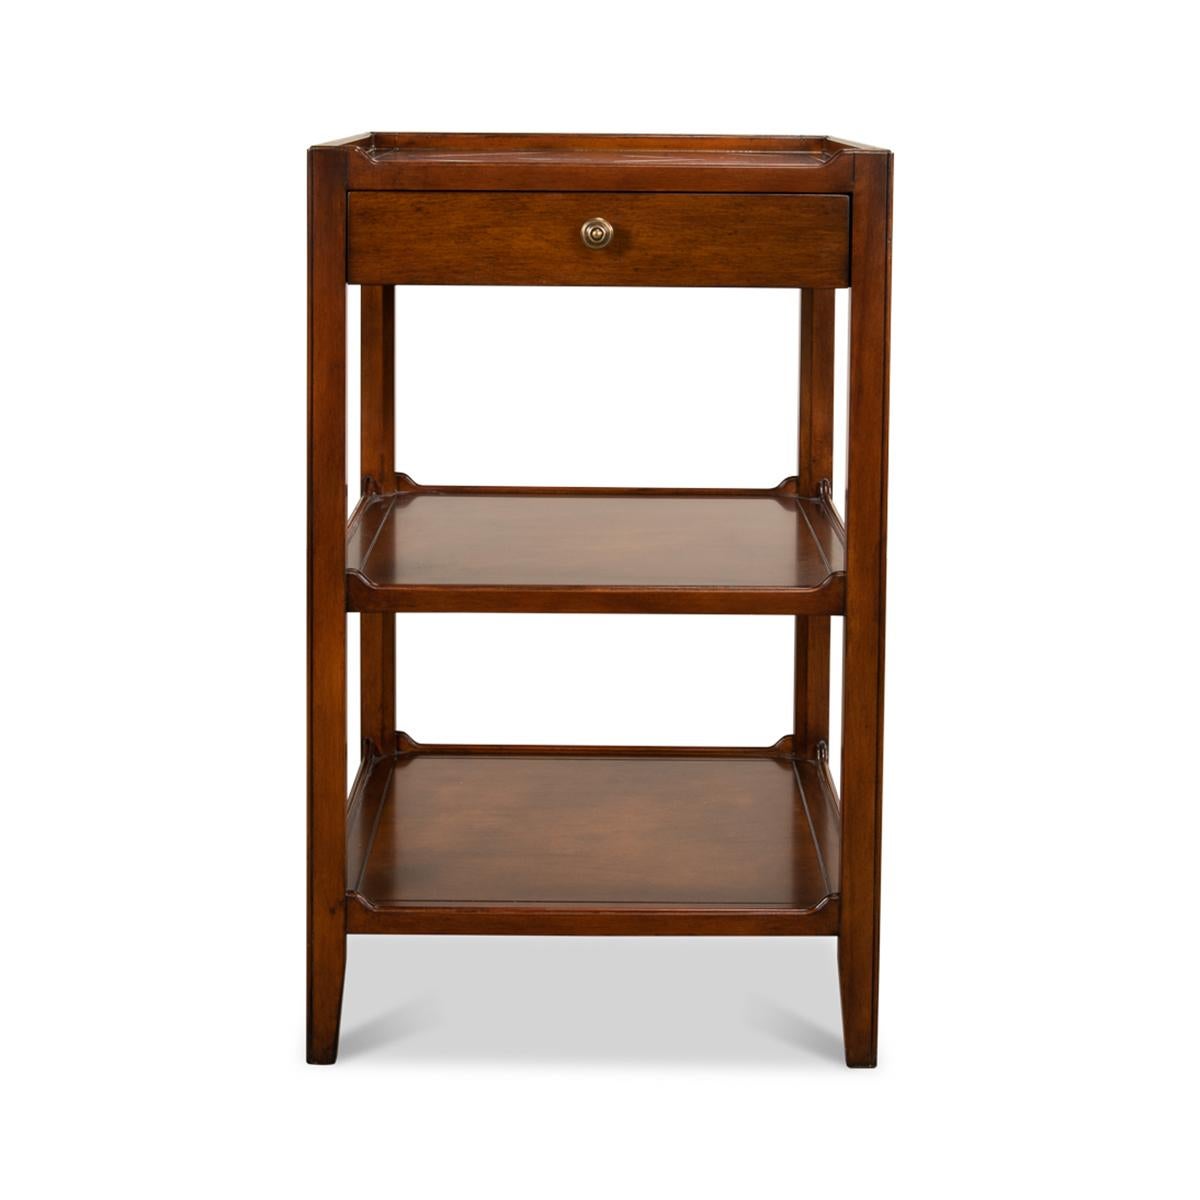 A rustic walnut end table. This table's style is inspired by the look of an etagere. Below the upper shelf is an oak-lined frieze drawer in addition to two lower shelves. The top of the table features a beautiful quartered veneer square